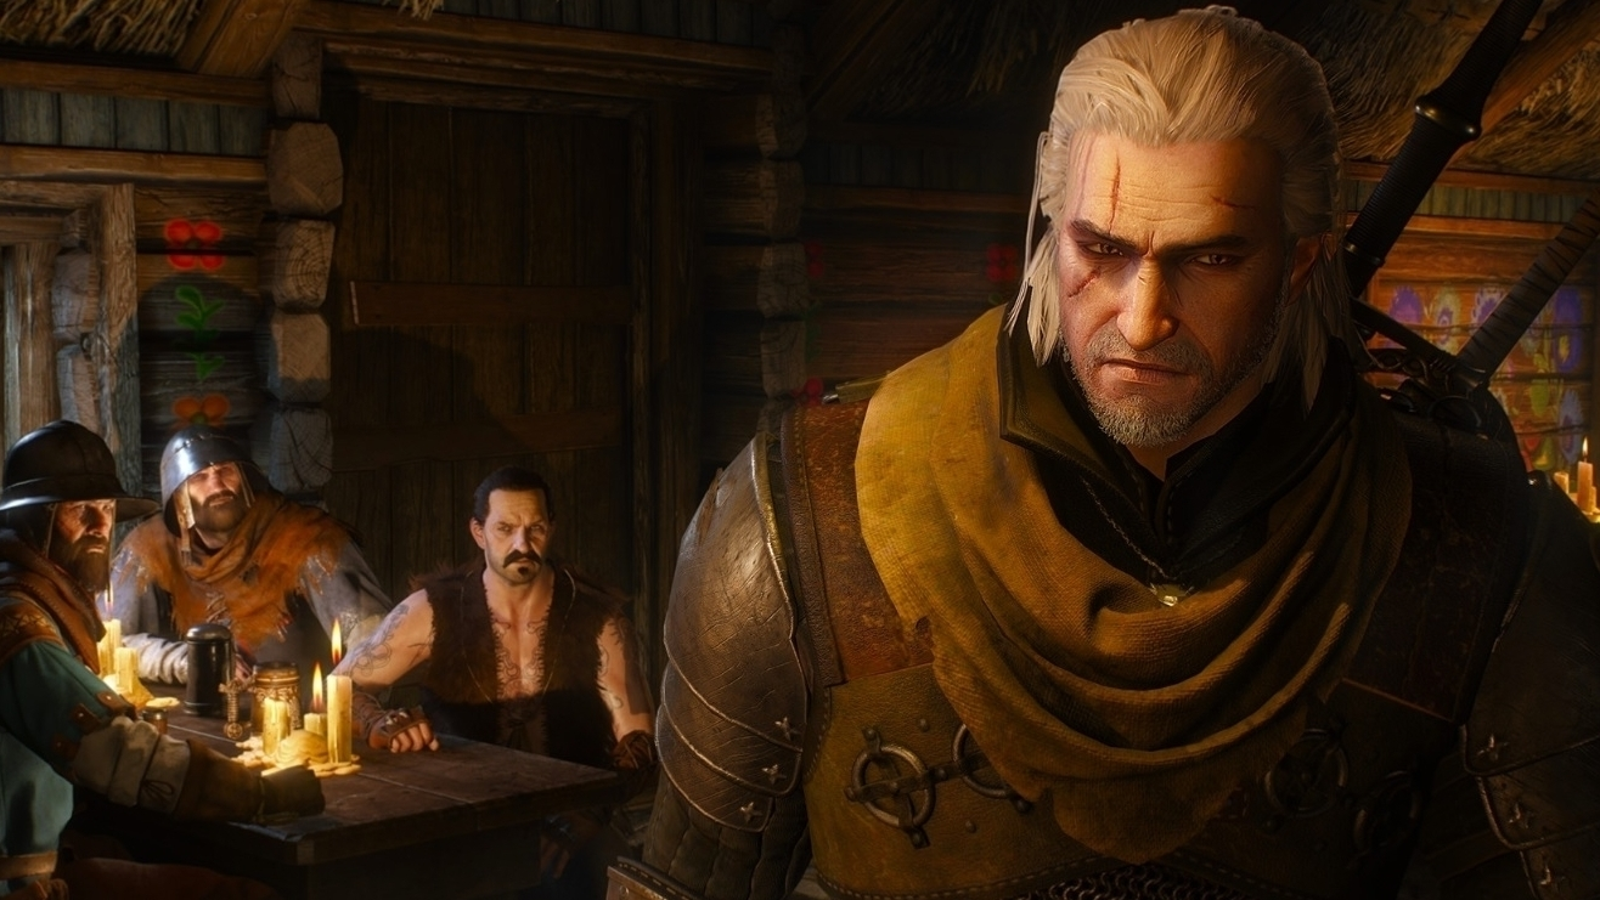 Where to Start With The Witcher Games if You Loved the Netflix